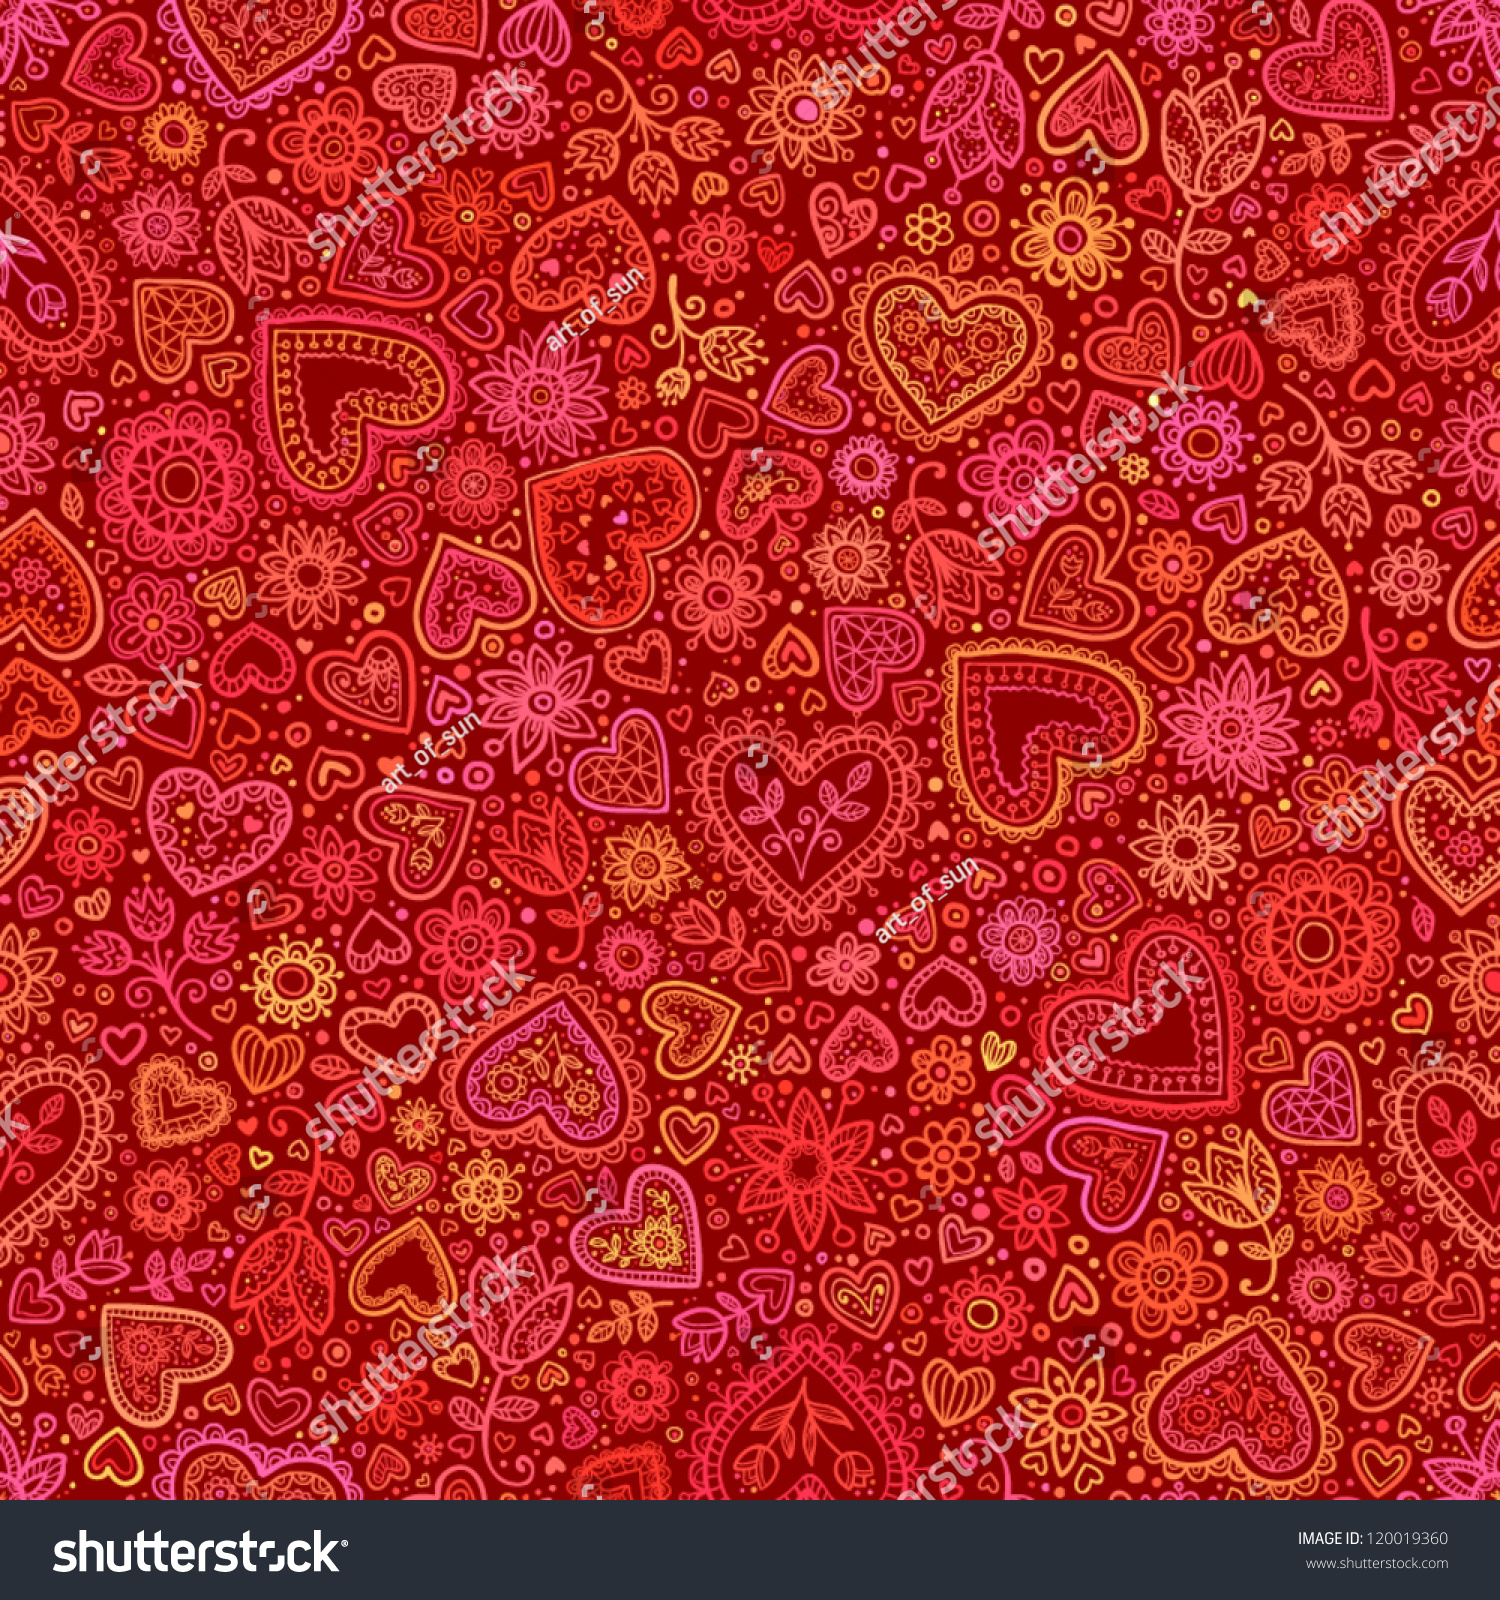 valentines day background clipart - photo #35